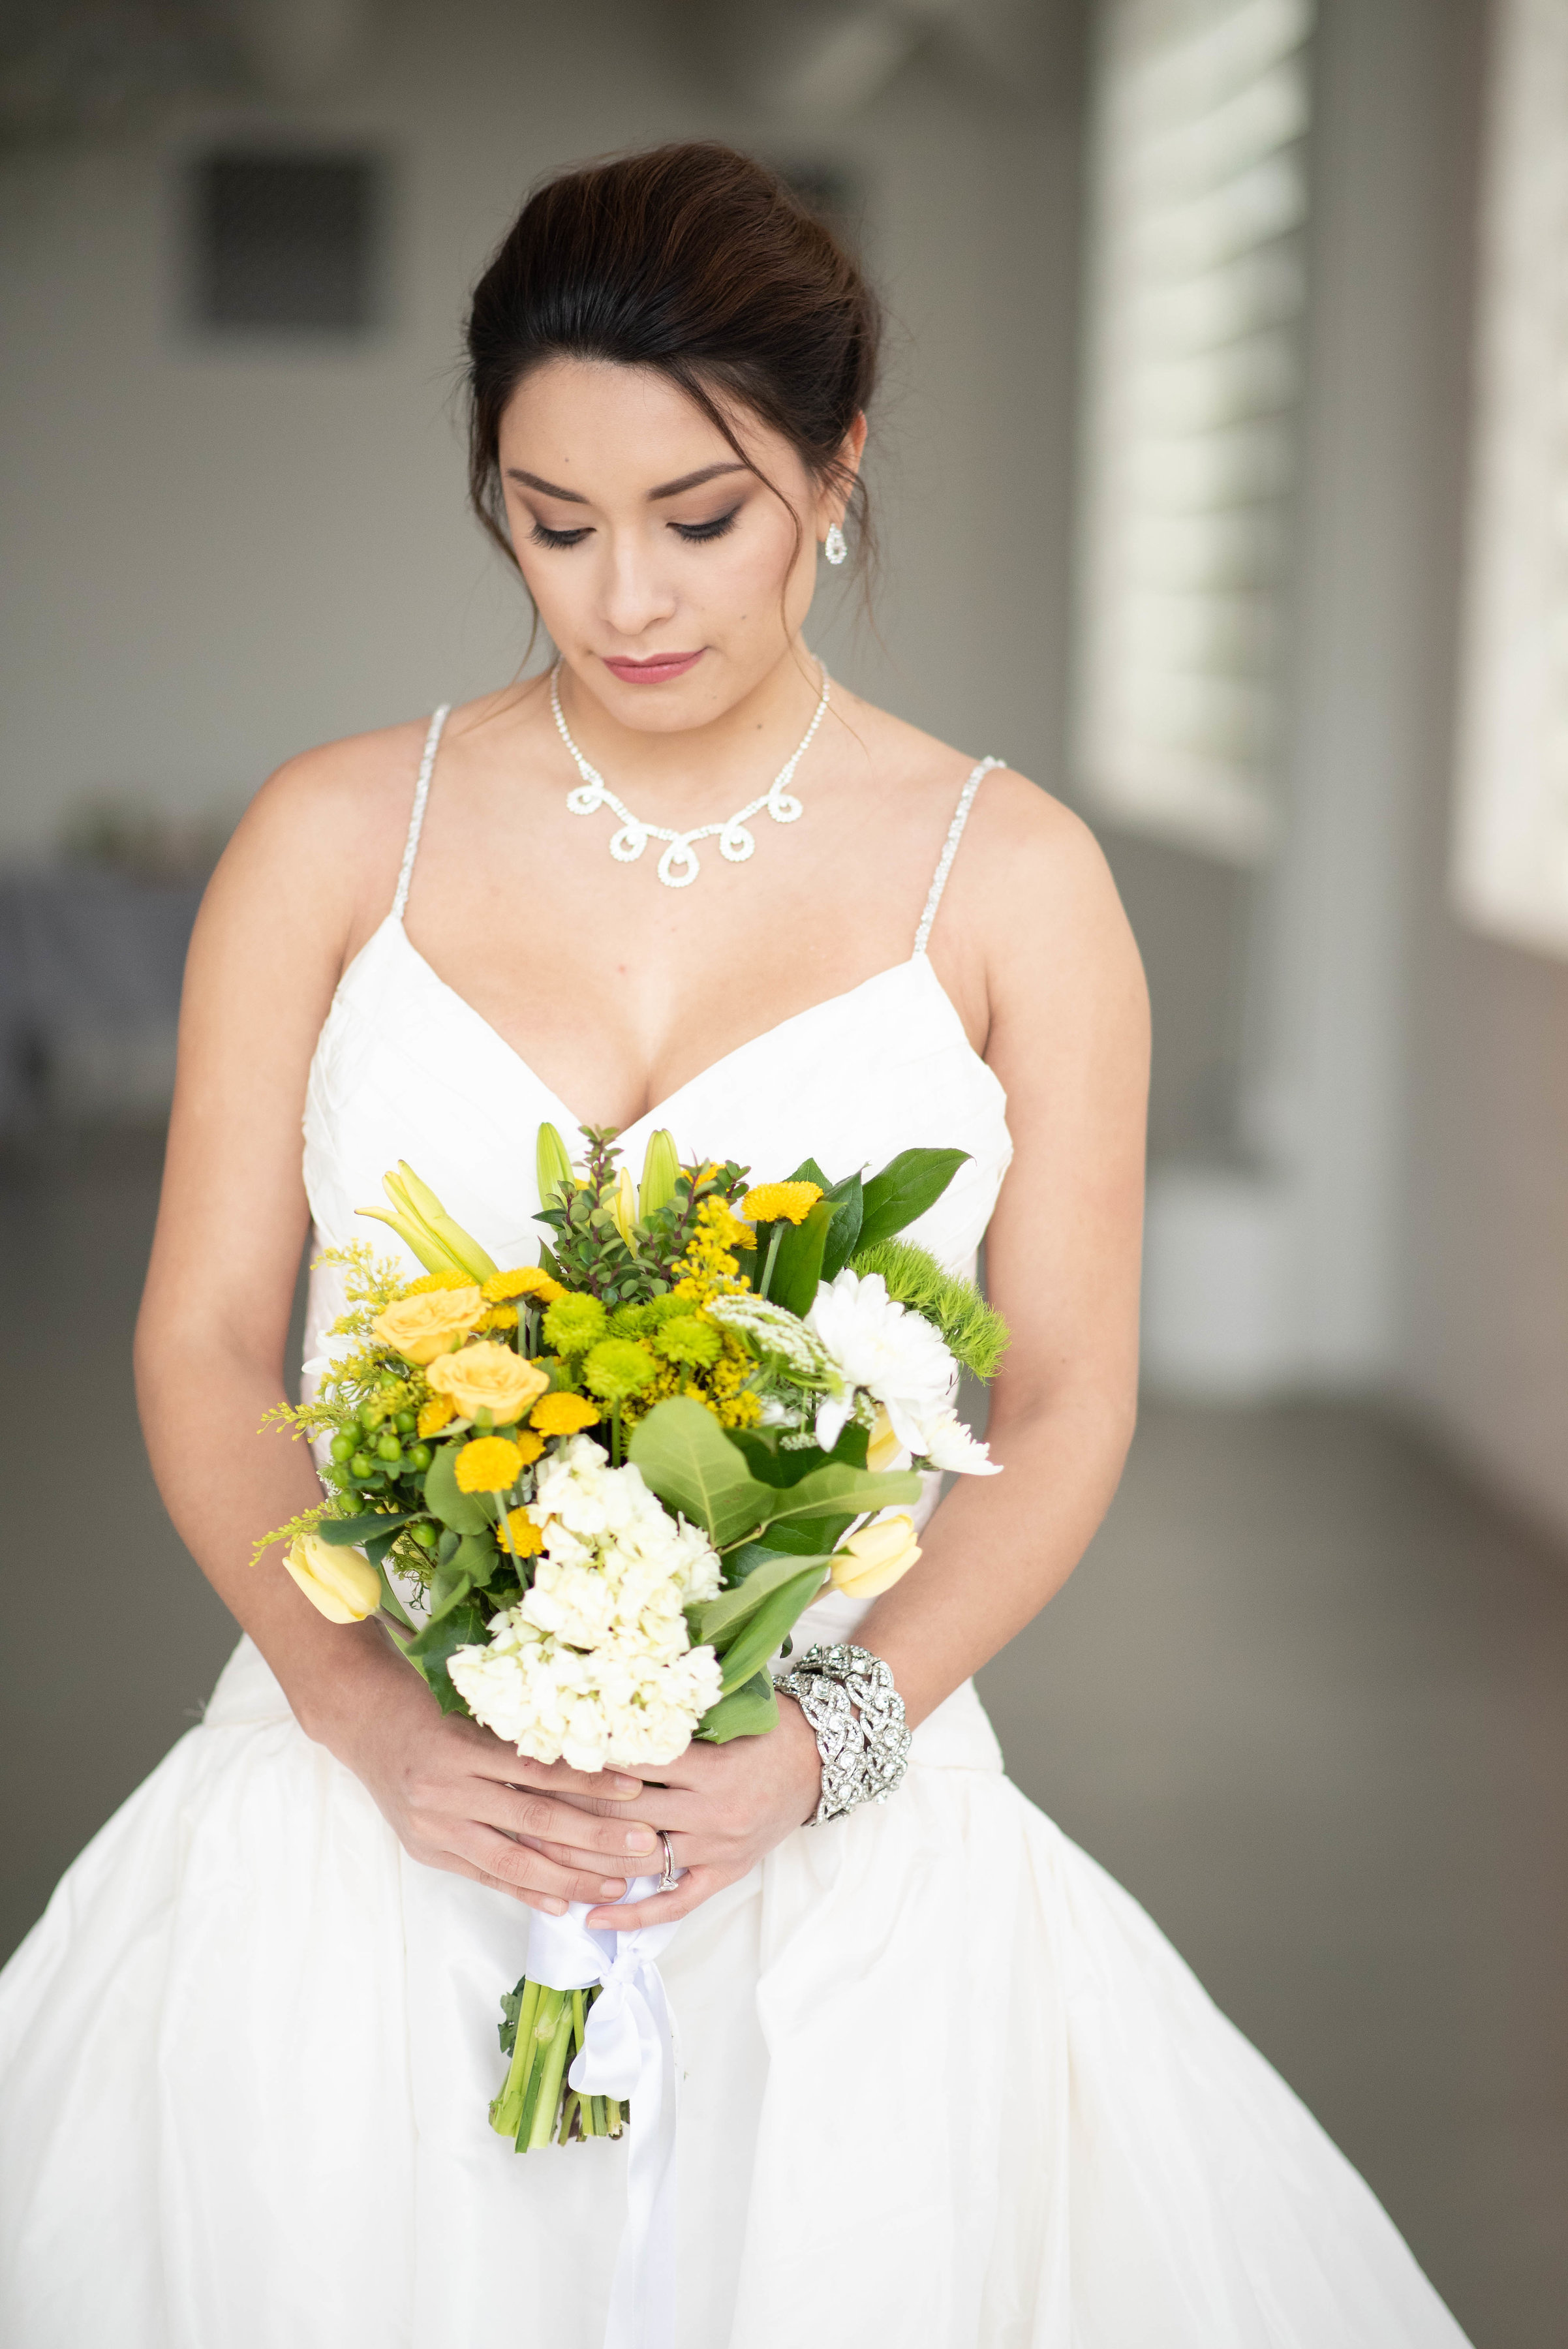 Mustard, Honey, &amp; Hexagons Minimalistic Styled Shoot captured by Chante Burt Photography. Visit CHItheeWED.com for more wedding ideas!